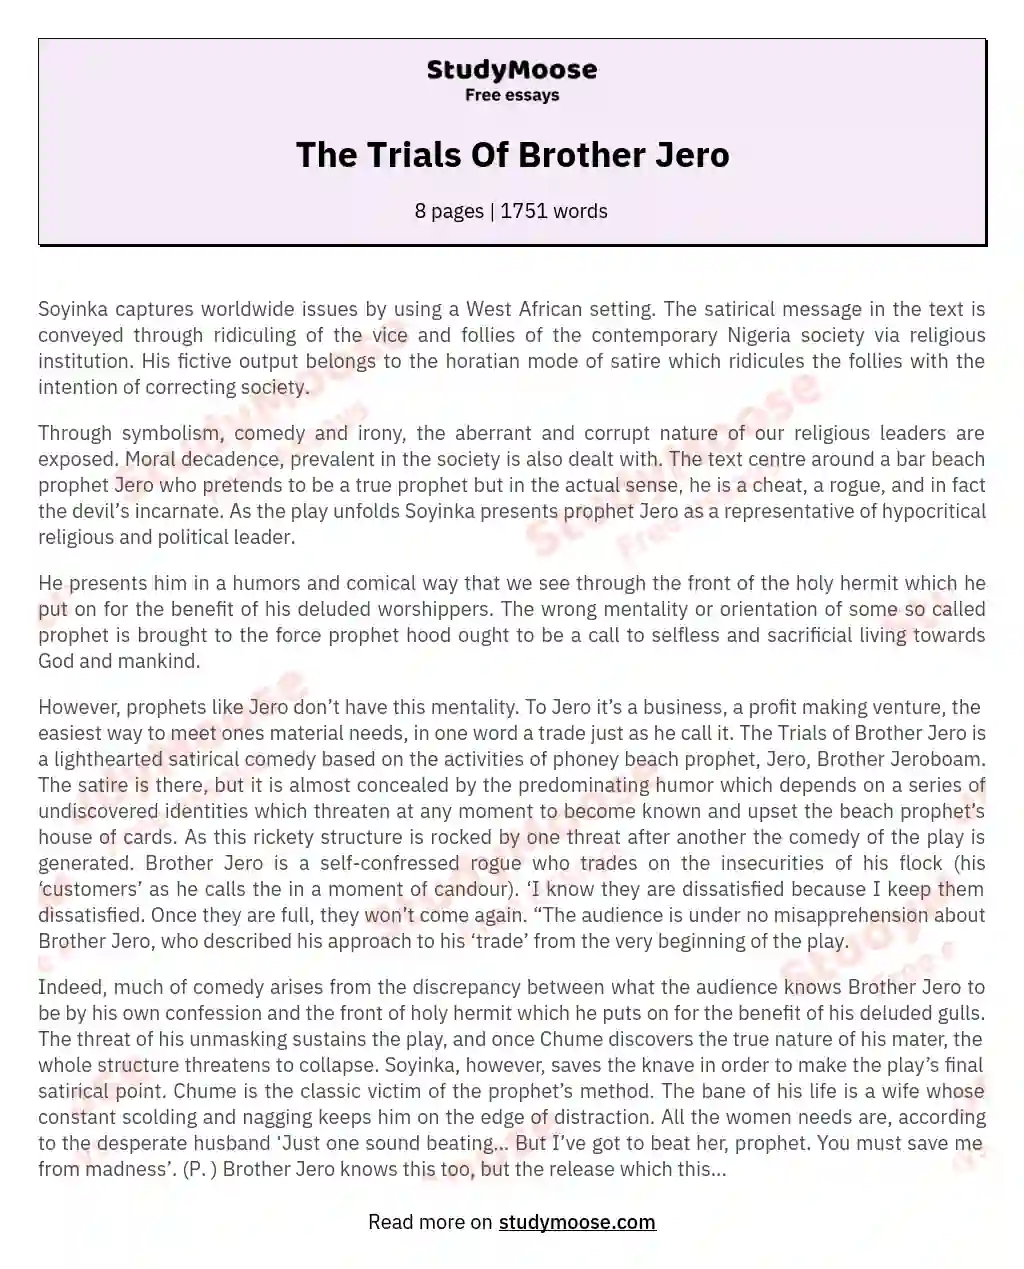 The Trials Of Brother Jero essay